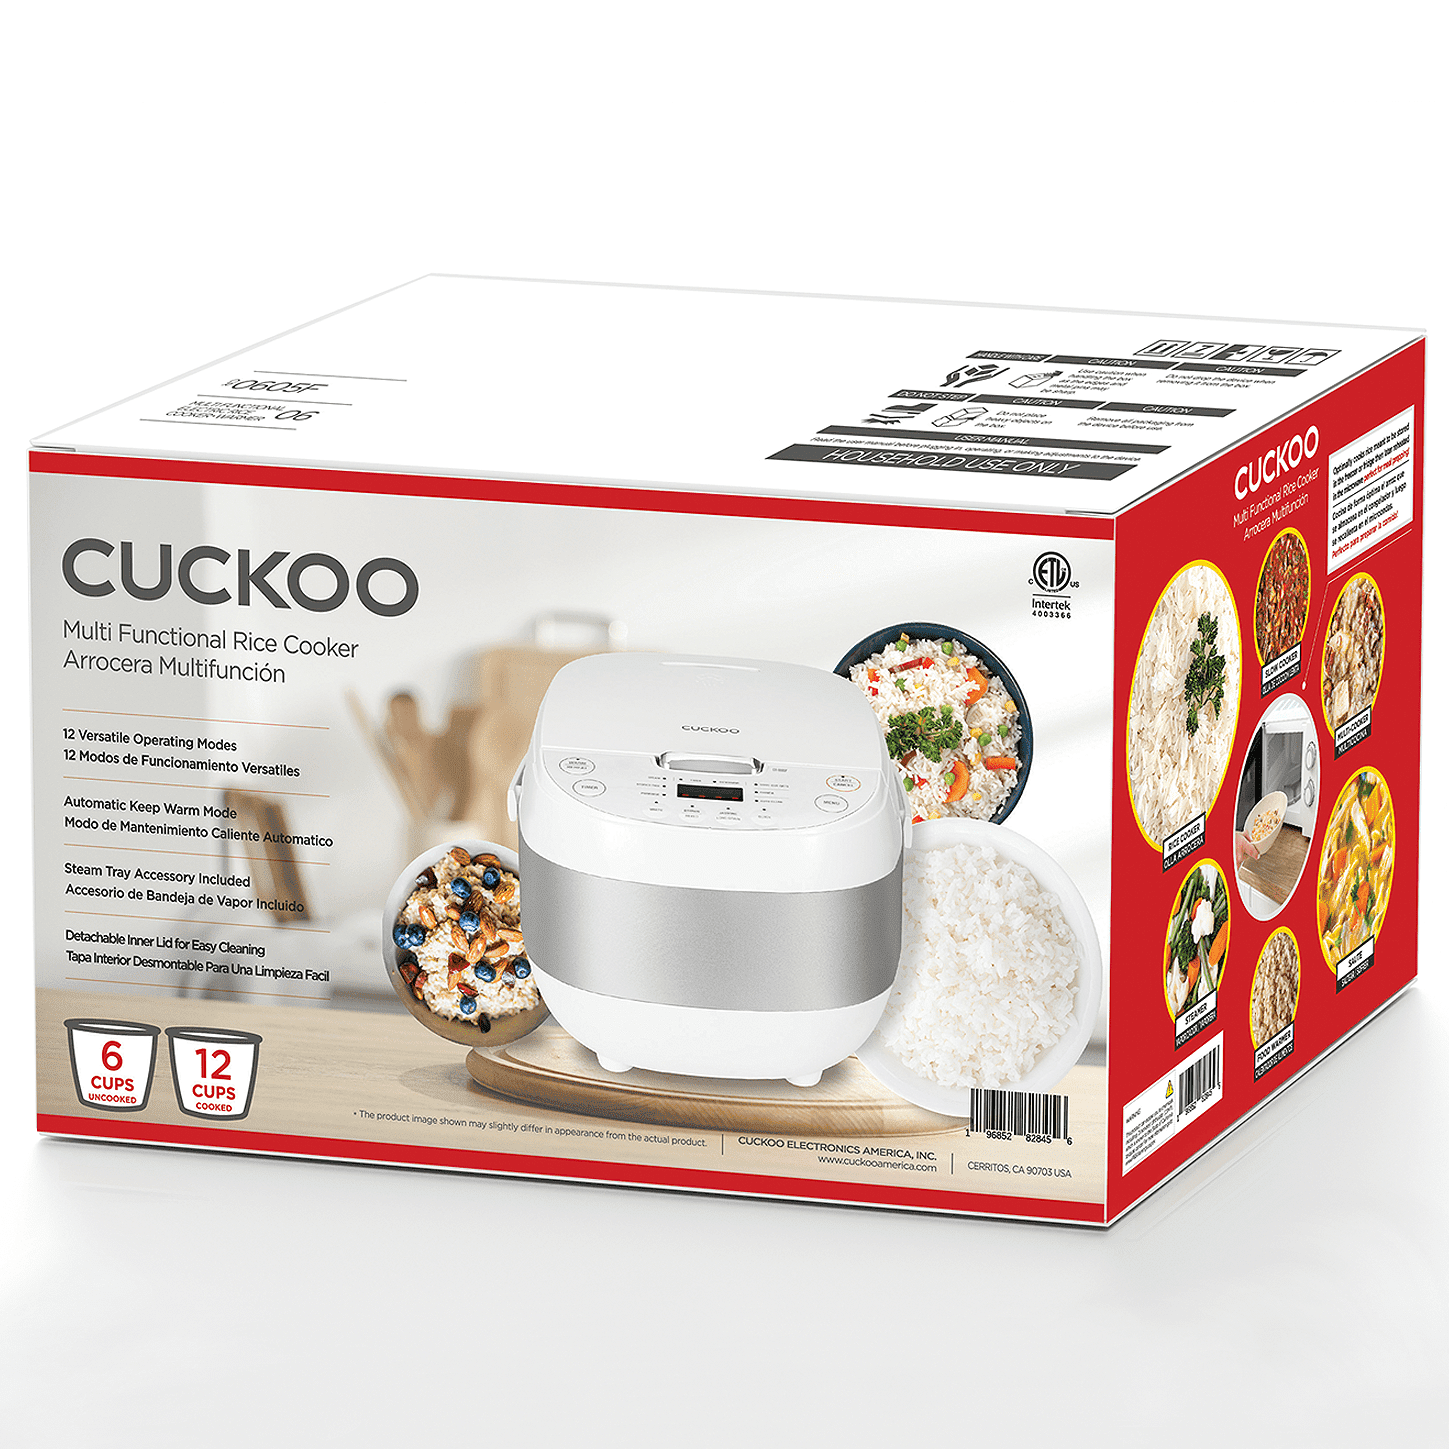  CUCKOO CR-0655F, 6-Cup (Uncooked) Micom Rice Cooker, 12 Menu  Options: White Rice, Brown Rice & More, Nonstick Inner Pot, Designed in  Korea